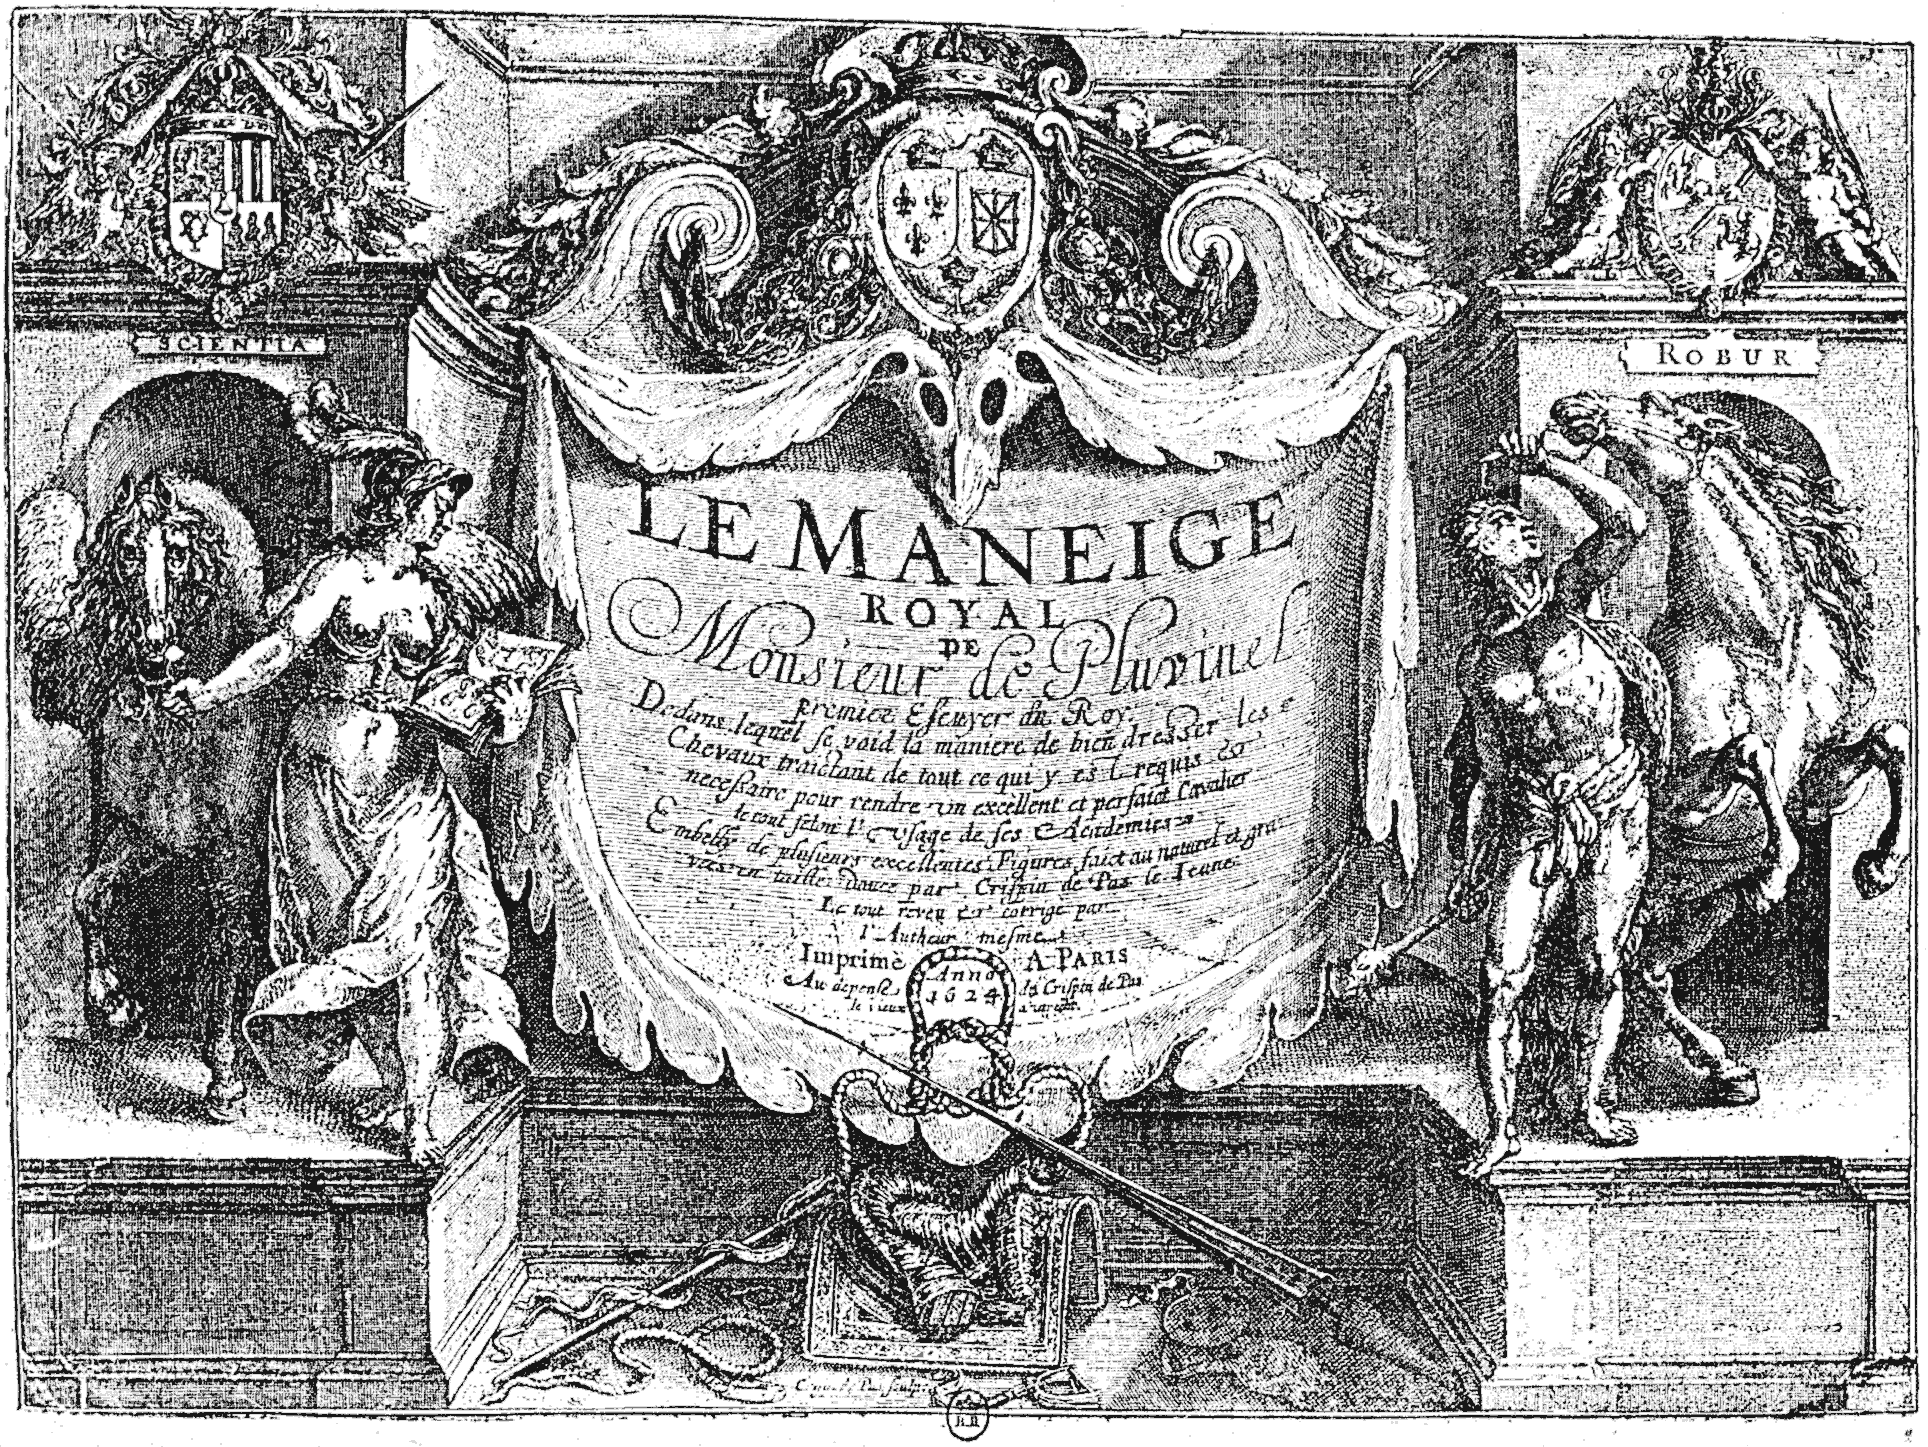 Pluvinel's 'Maneige Royal', 1624, title page, by the Dutch engraver Crispin Pass  From Henri Bouchot 'The Printed Book' (1887), page 161, published size in Bouchot 12 cm wide by 8.8 cm high.